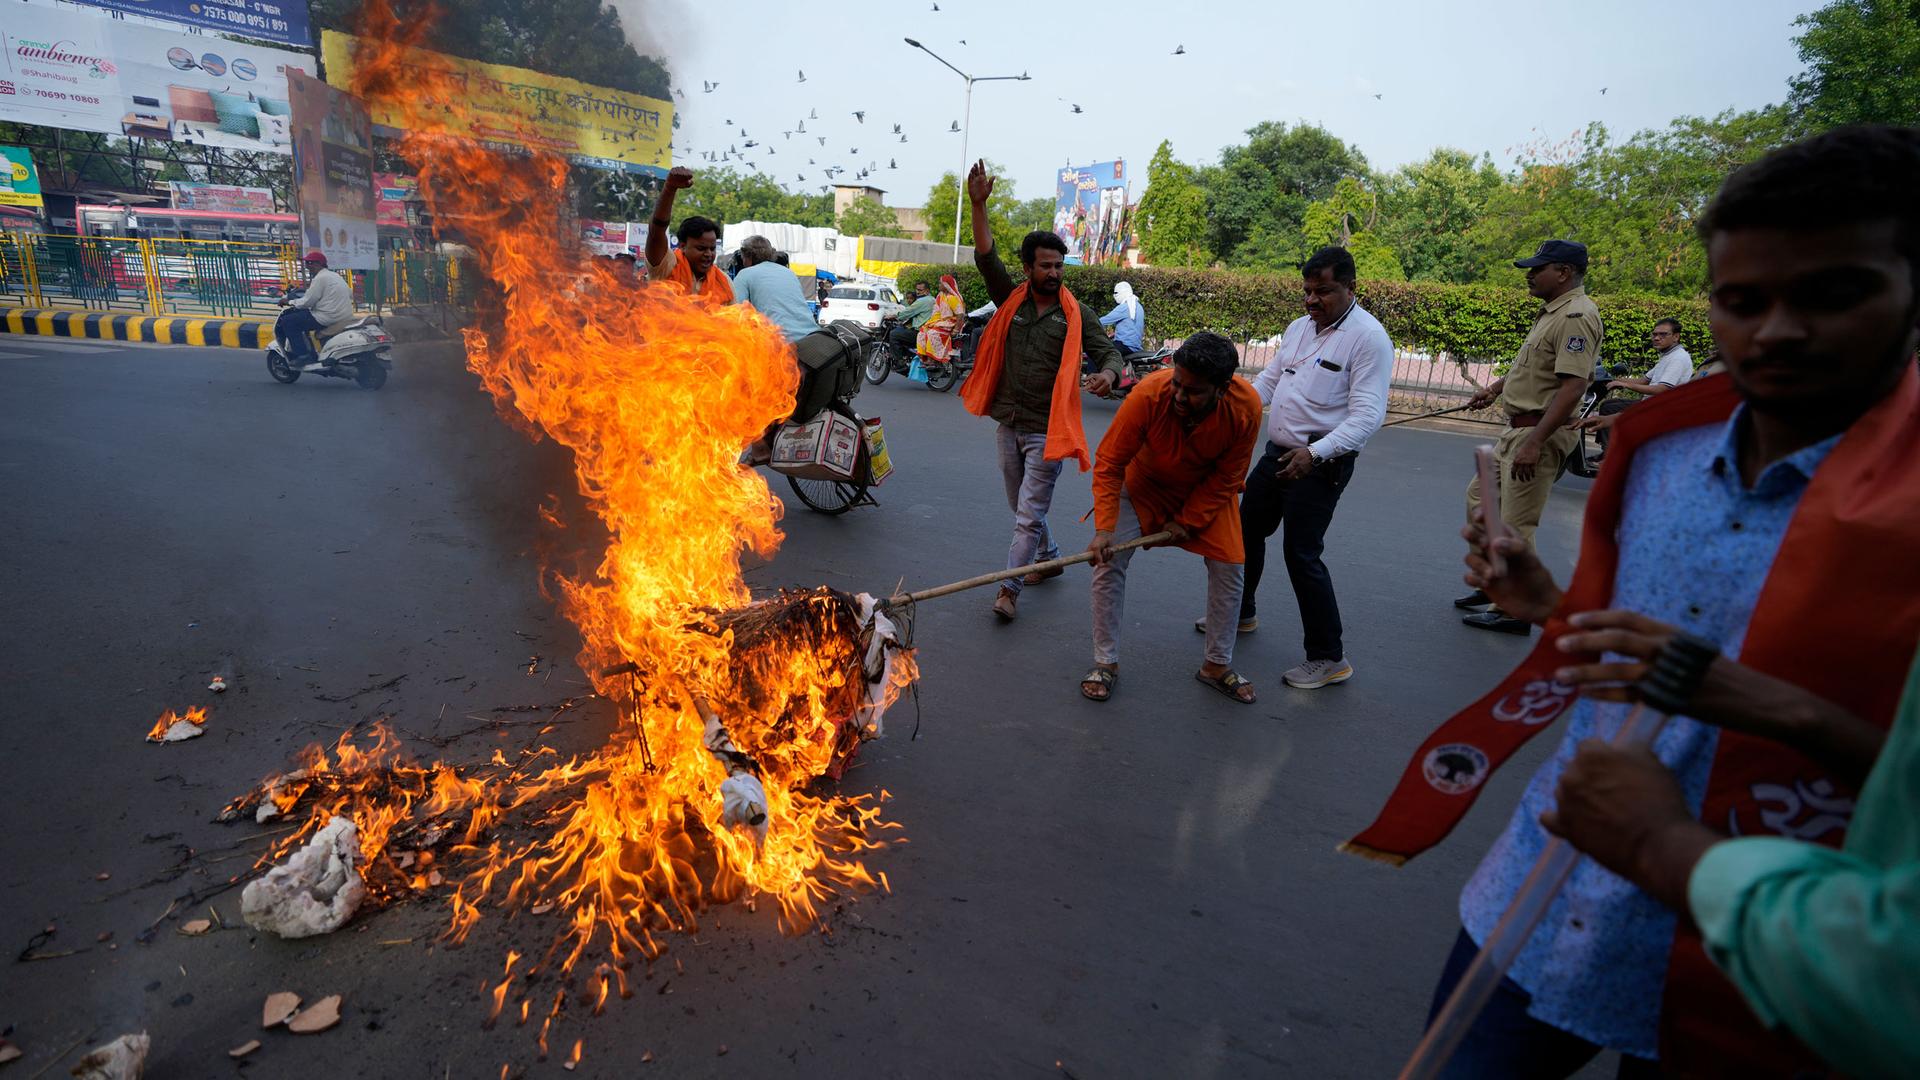 Activists from right-wing Hindu organization Bajrang Dal burn an effigy of Islamic terrorism during a protest against the Tuesday killing of Kanhaiya Lal, a Hindu man in a suspected religious attack in western Udaipur city of Rajasthan state, in Ahmedabad